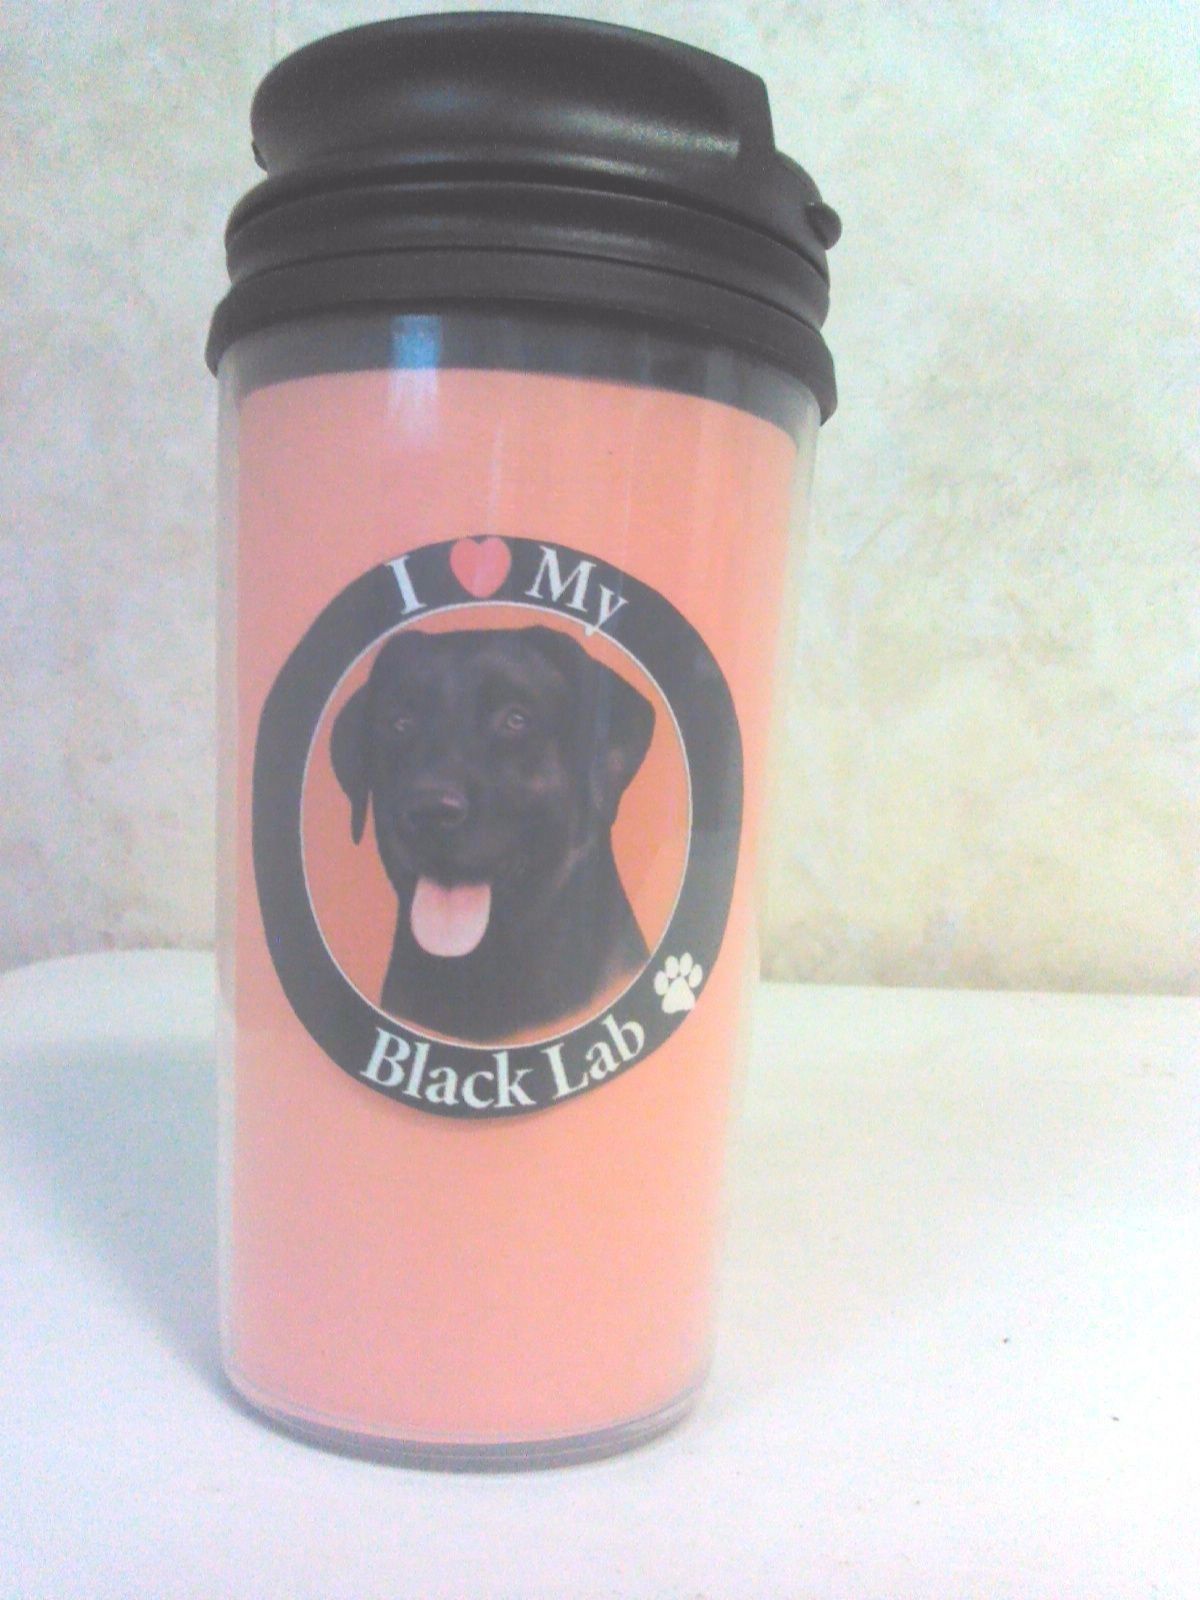 Black Lab Dog Thermo Travel Mug Drinking Cup Glass With Screw on Lids ALL BREED - $5.95